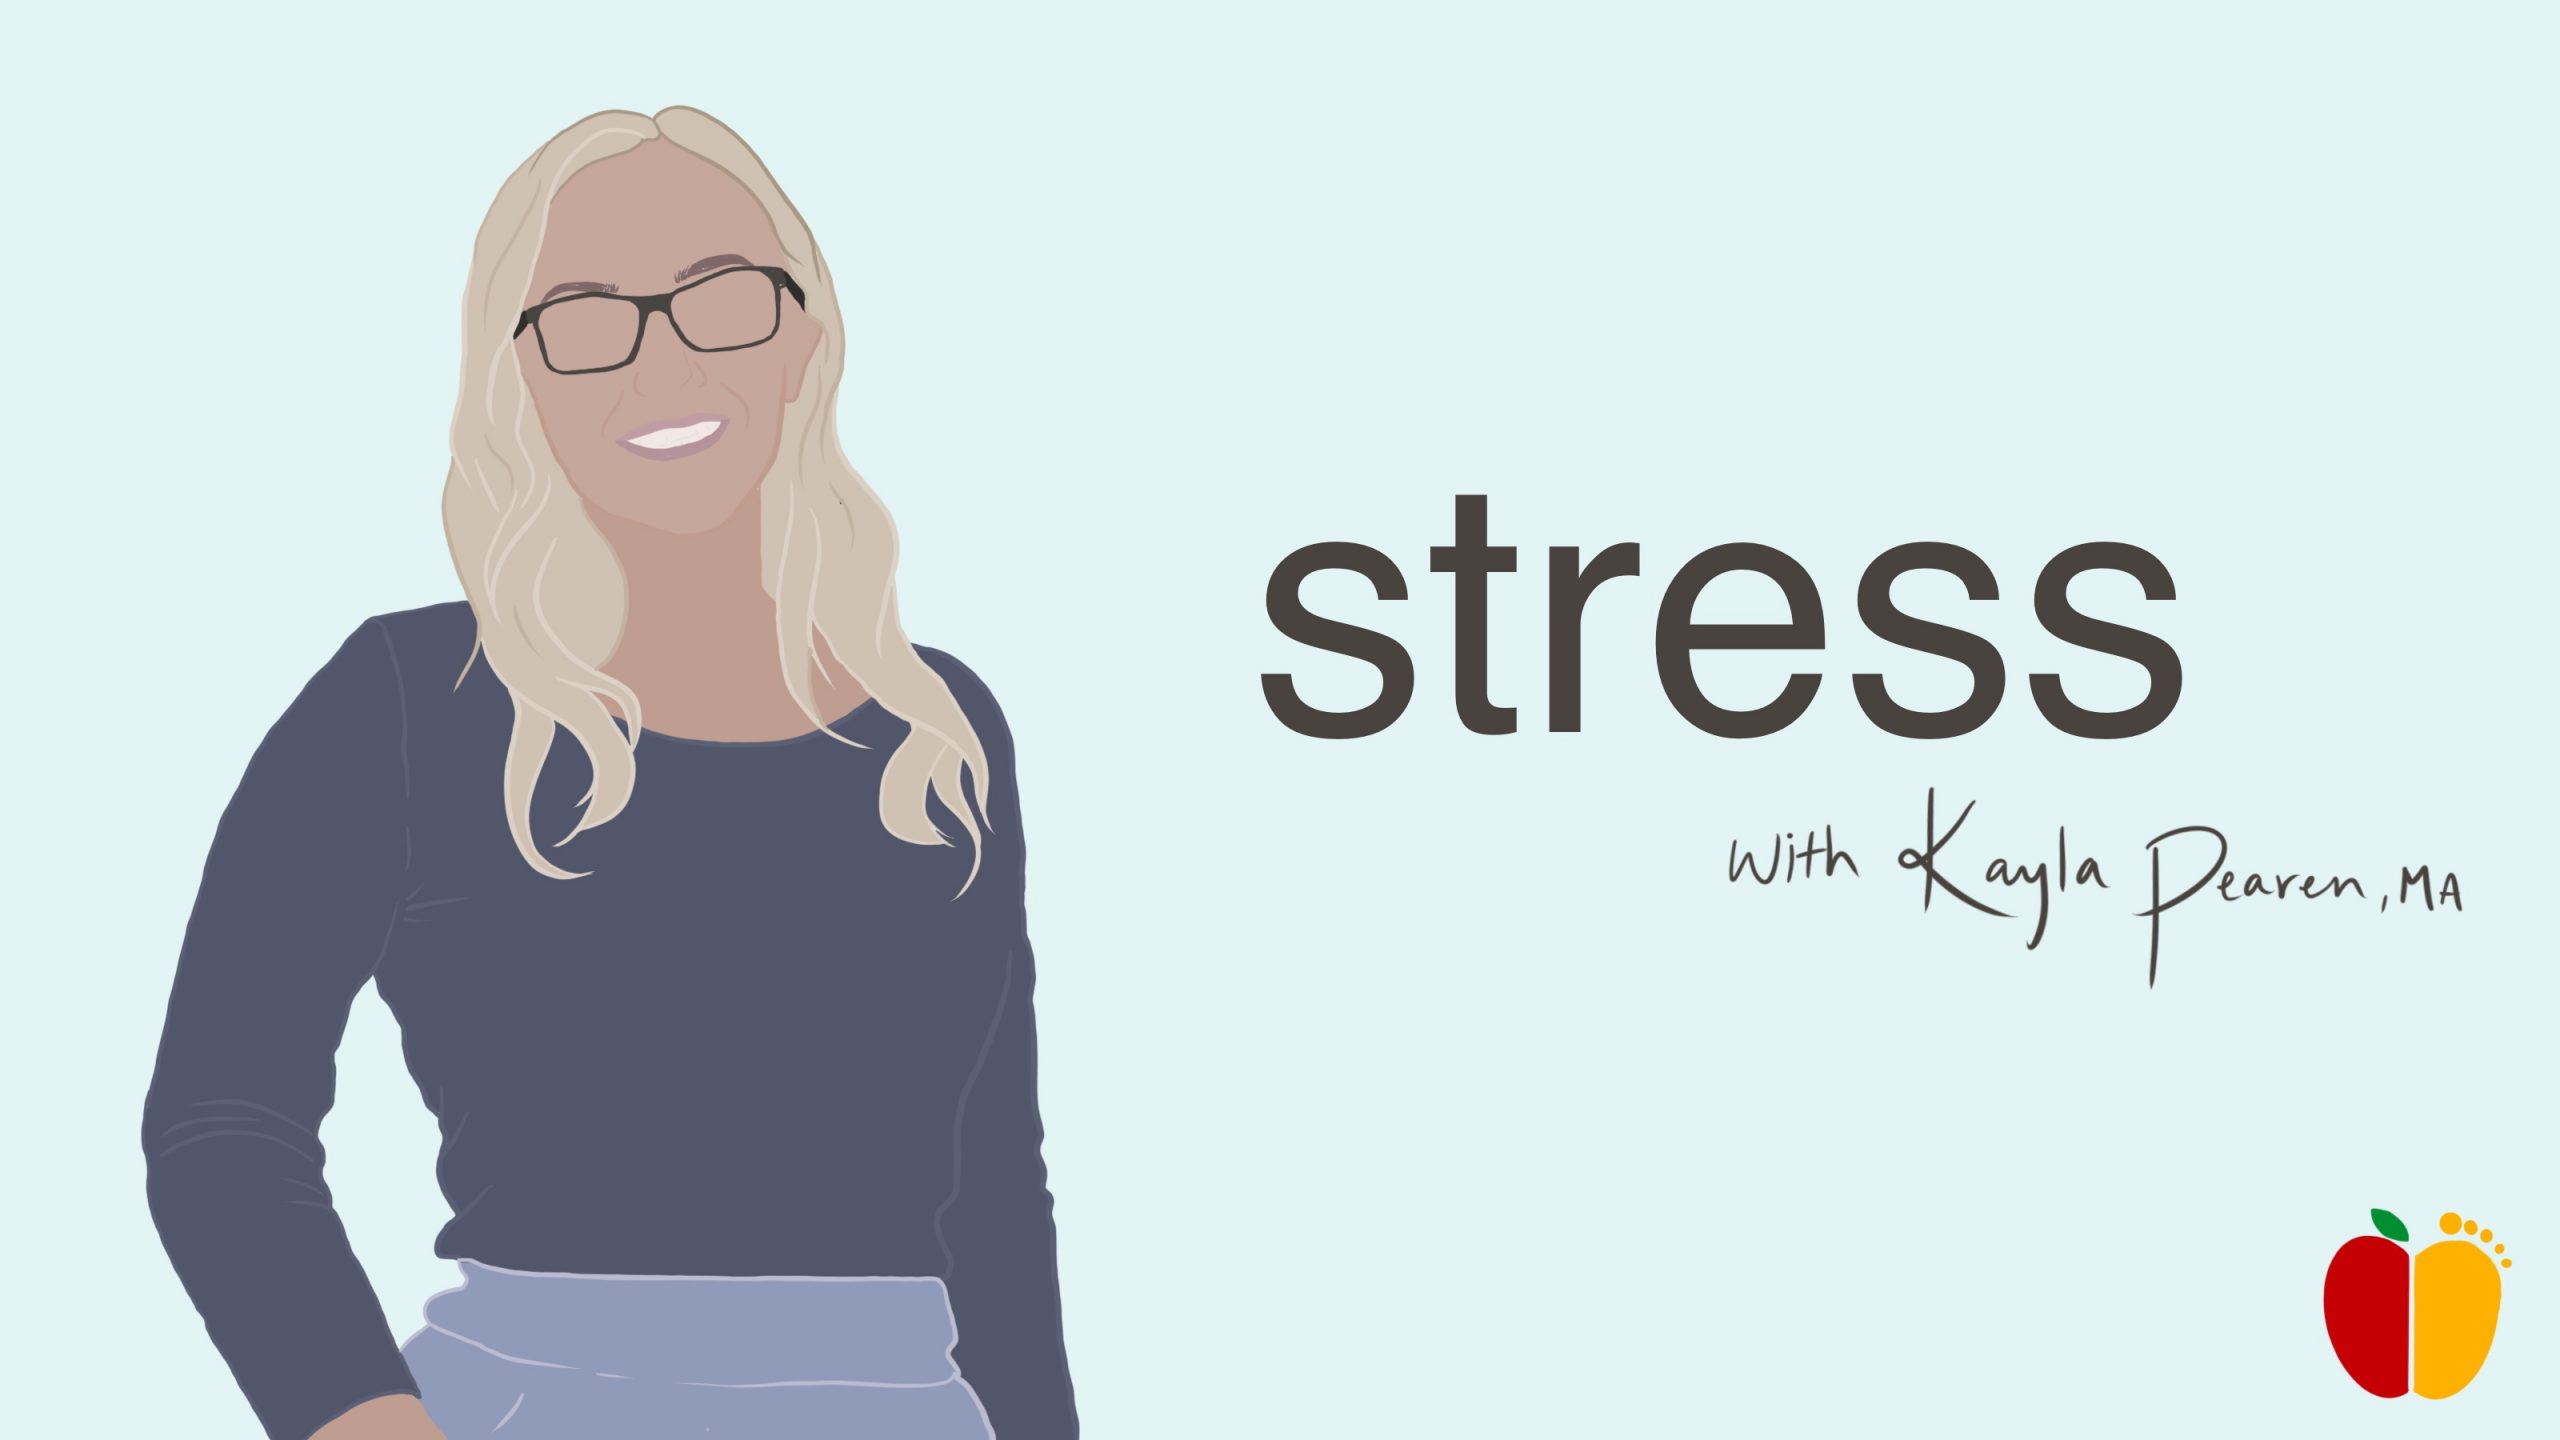 A cartoon image of a smiling female with the text "stress with Kayla Pearen, MA"